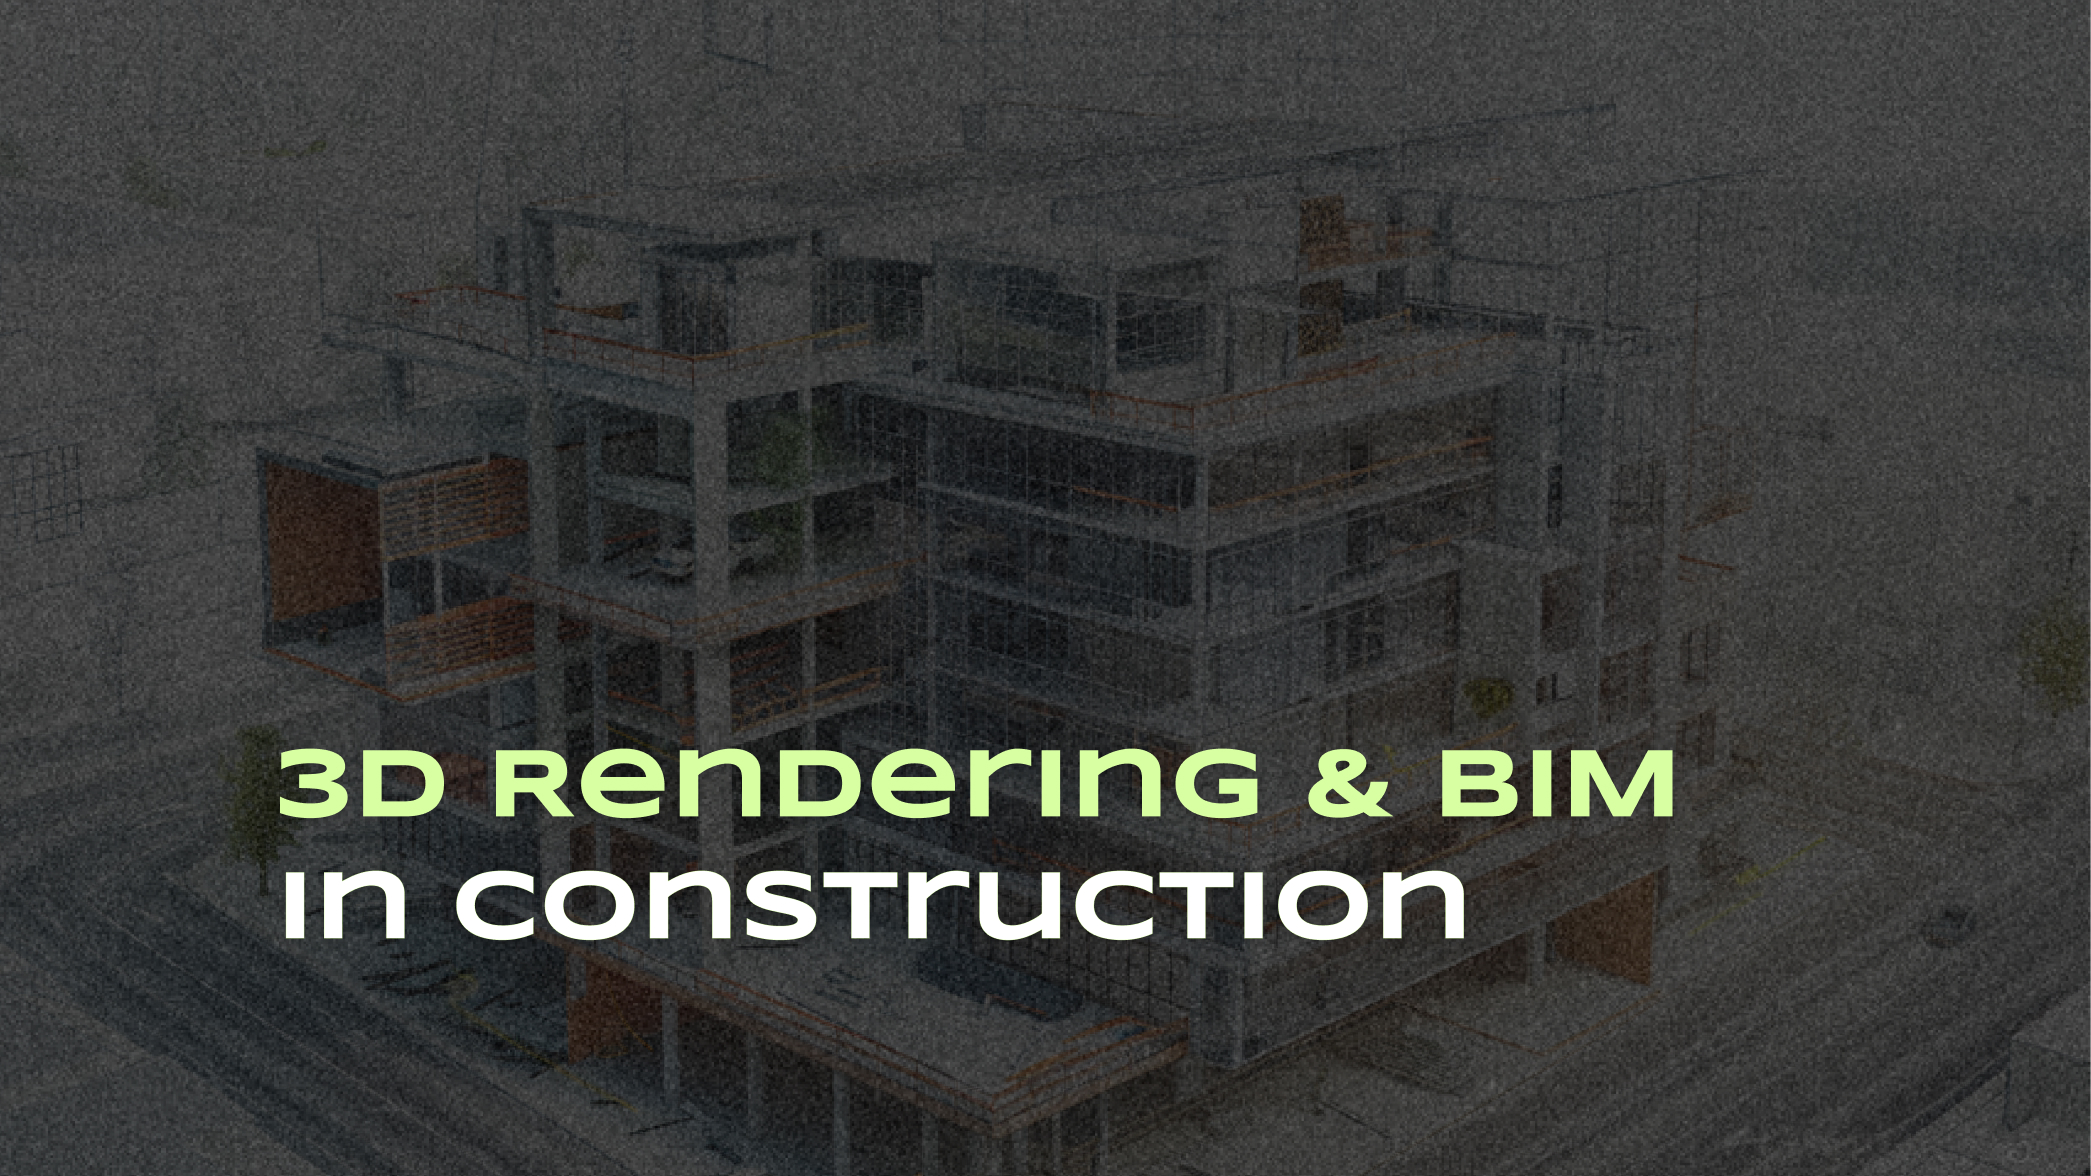 Integration of 3D rendering and BIM in modern construction